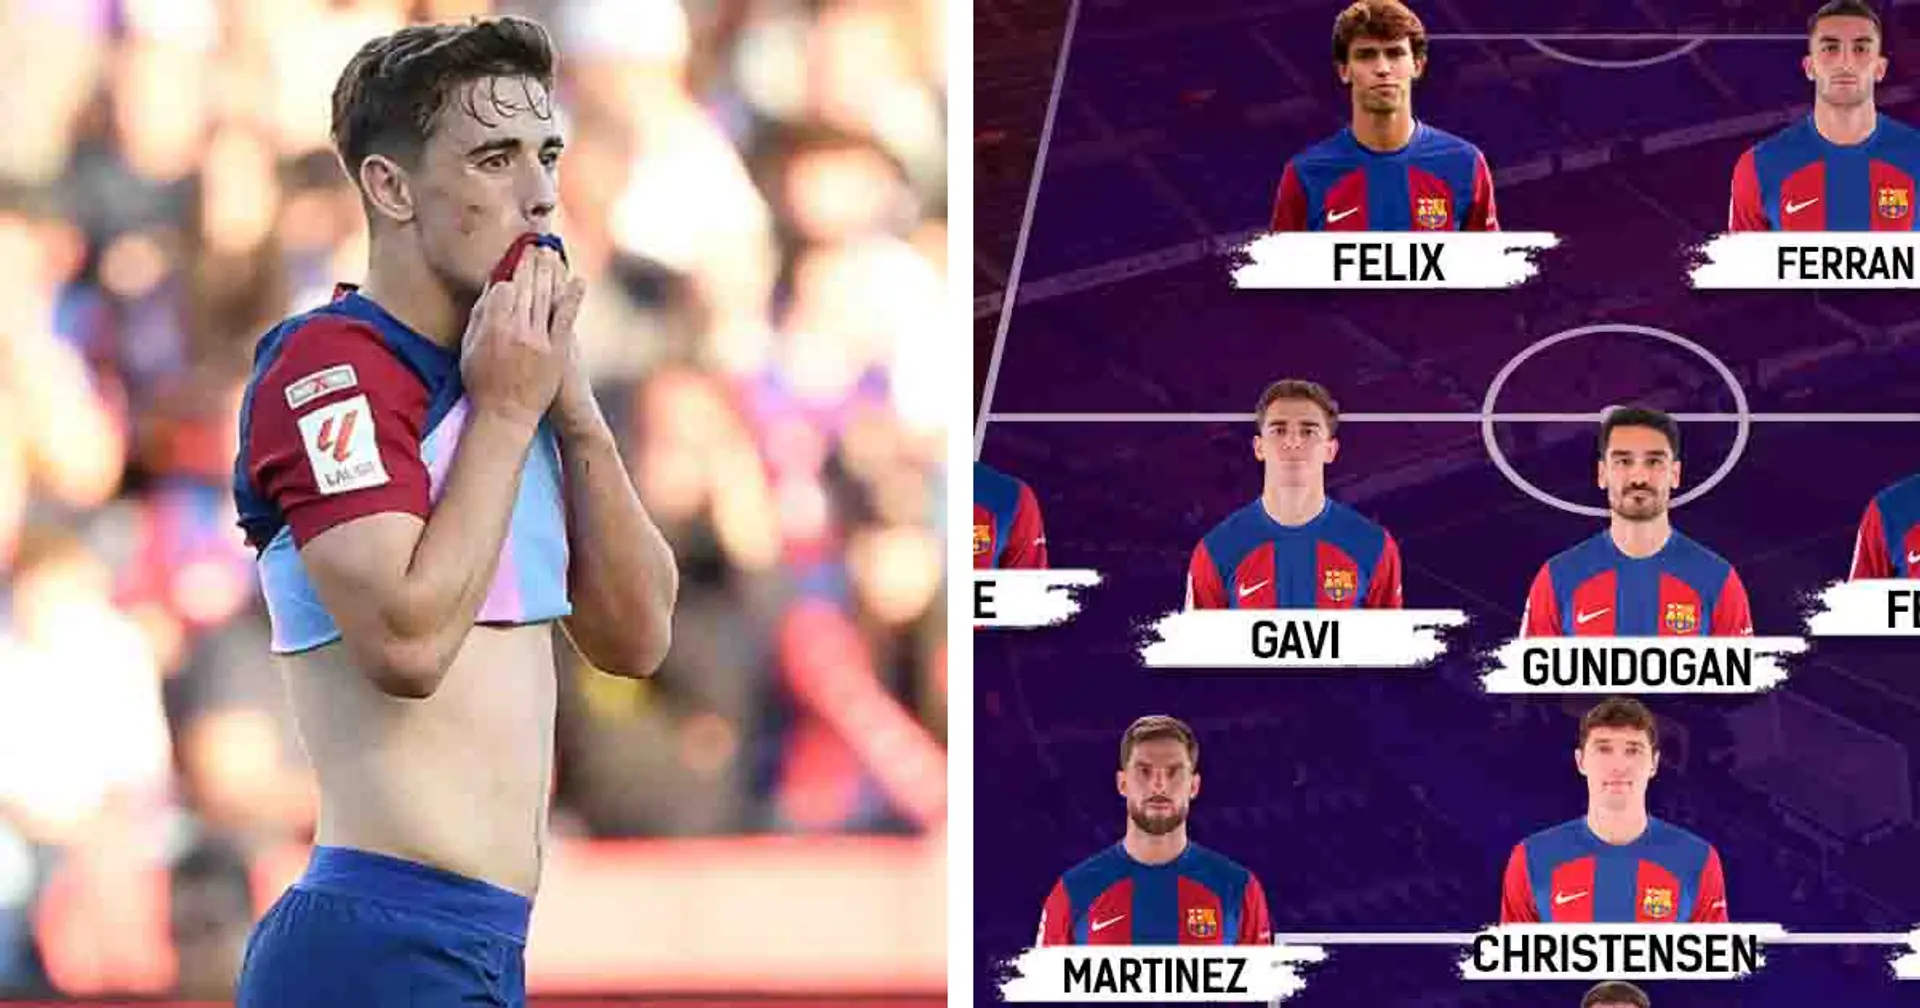 Barcelona's biggest strengths in Real Madrid defeat shown in lineup - four players feature